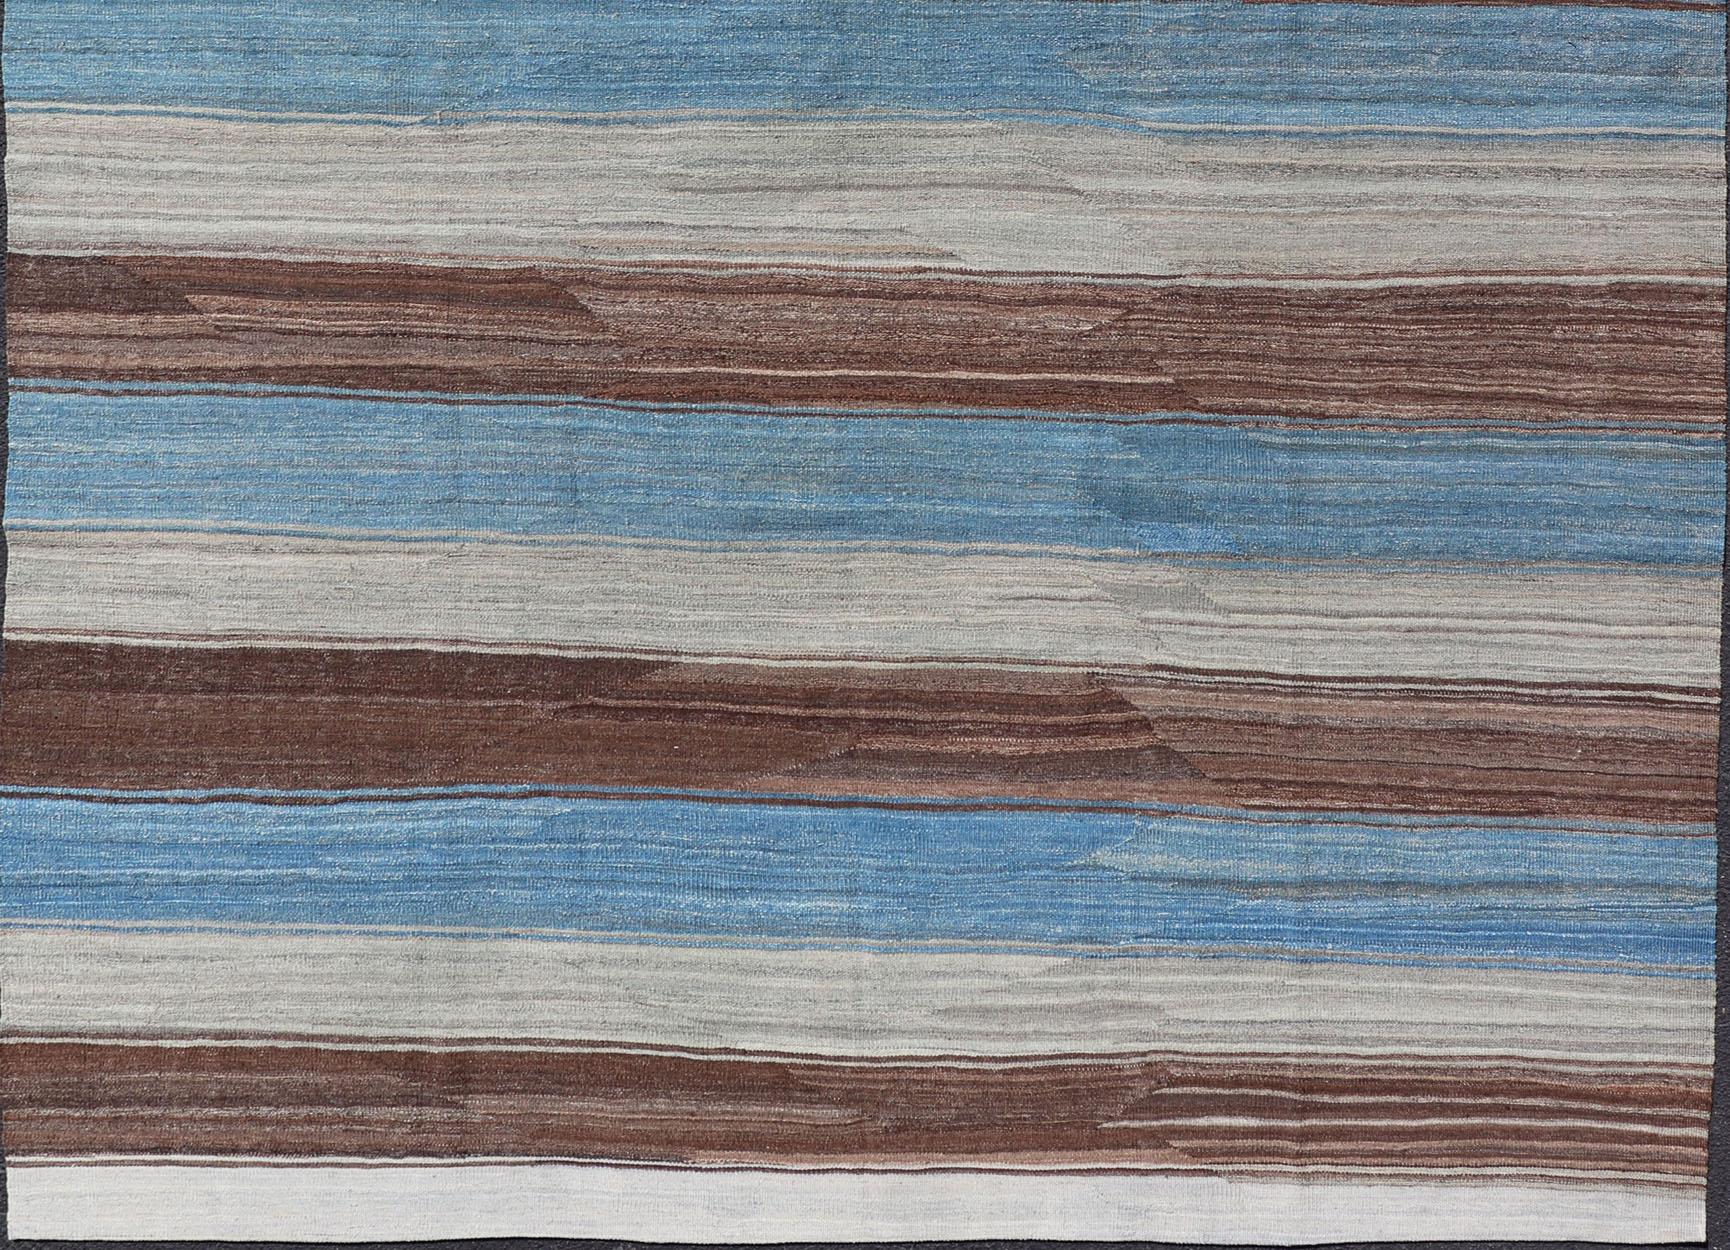 Flat-weave Kilim rug with stripes with modern design in shades of blue, gray, brown and cream, rug AFG-27629, country of origin / type: Afghanistan / Kilim, Stripe Kilim, Stripe design 

This beautiful piece features a Classic stripe design that